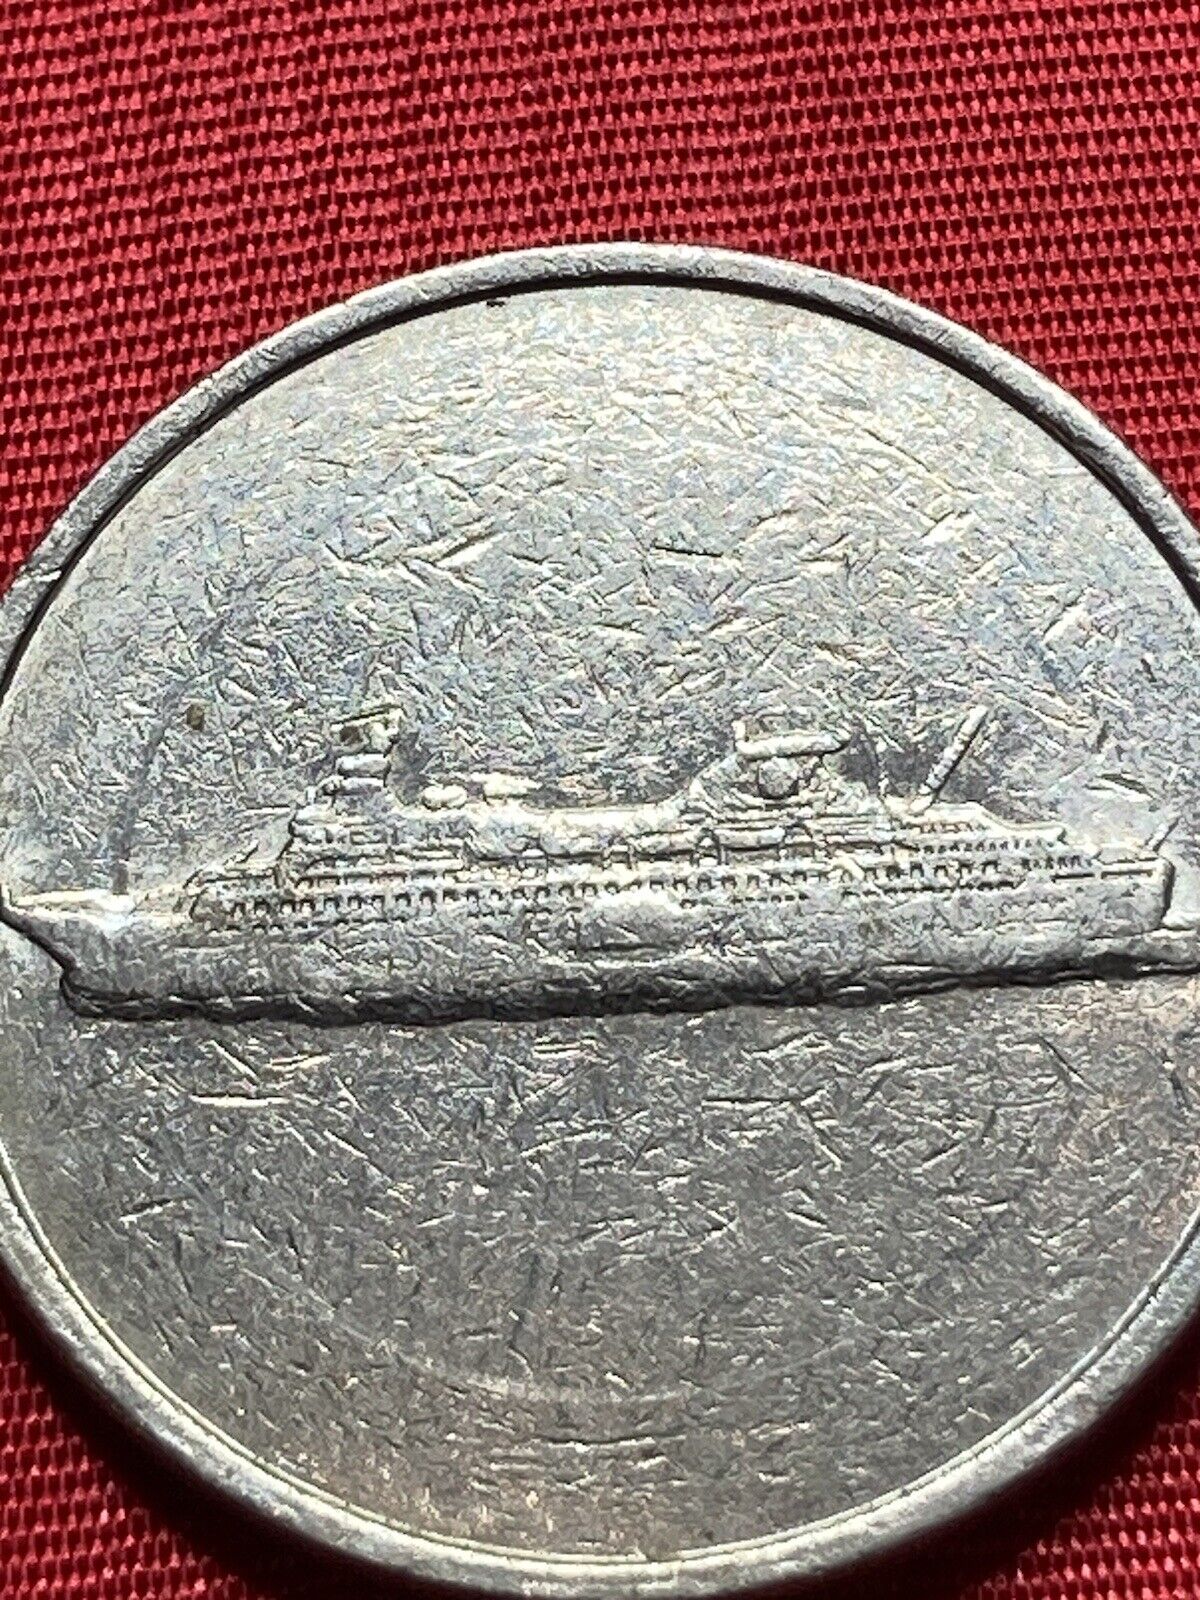 25 CENT ISALND HOLIDAY GAMING TOKEN - SHIP - LOOK